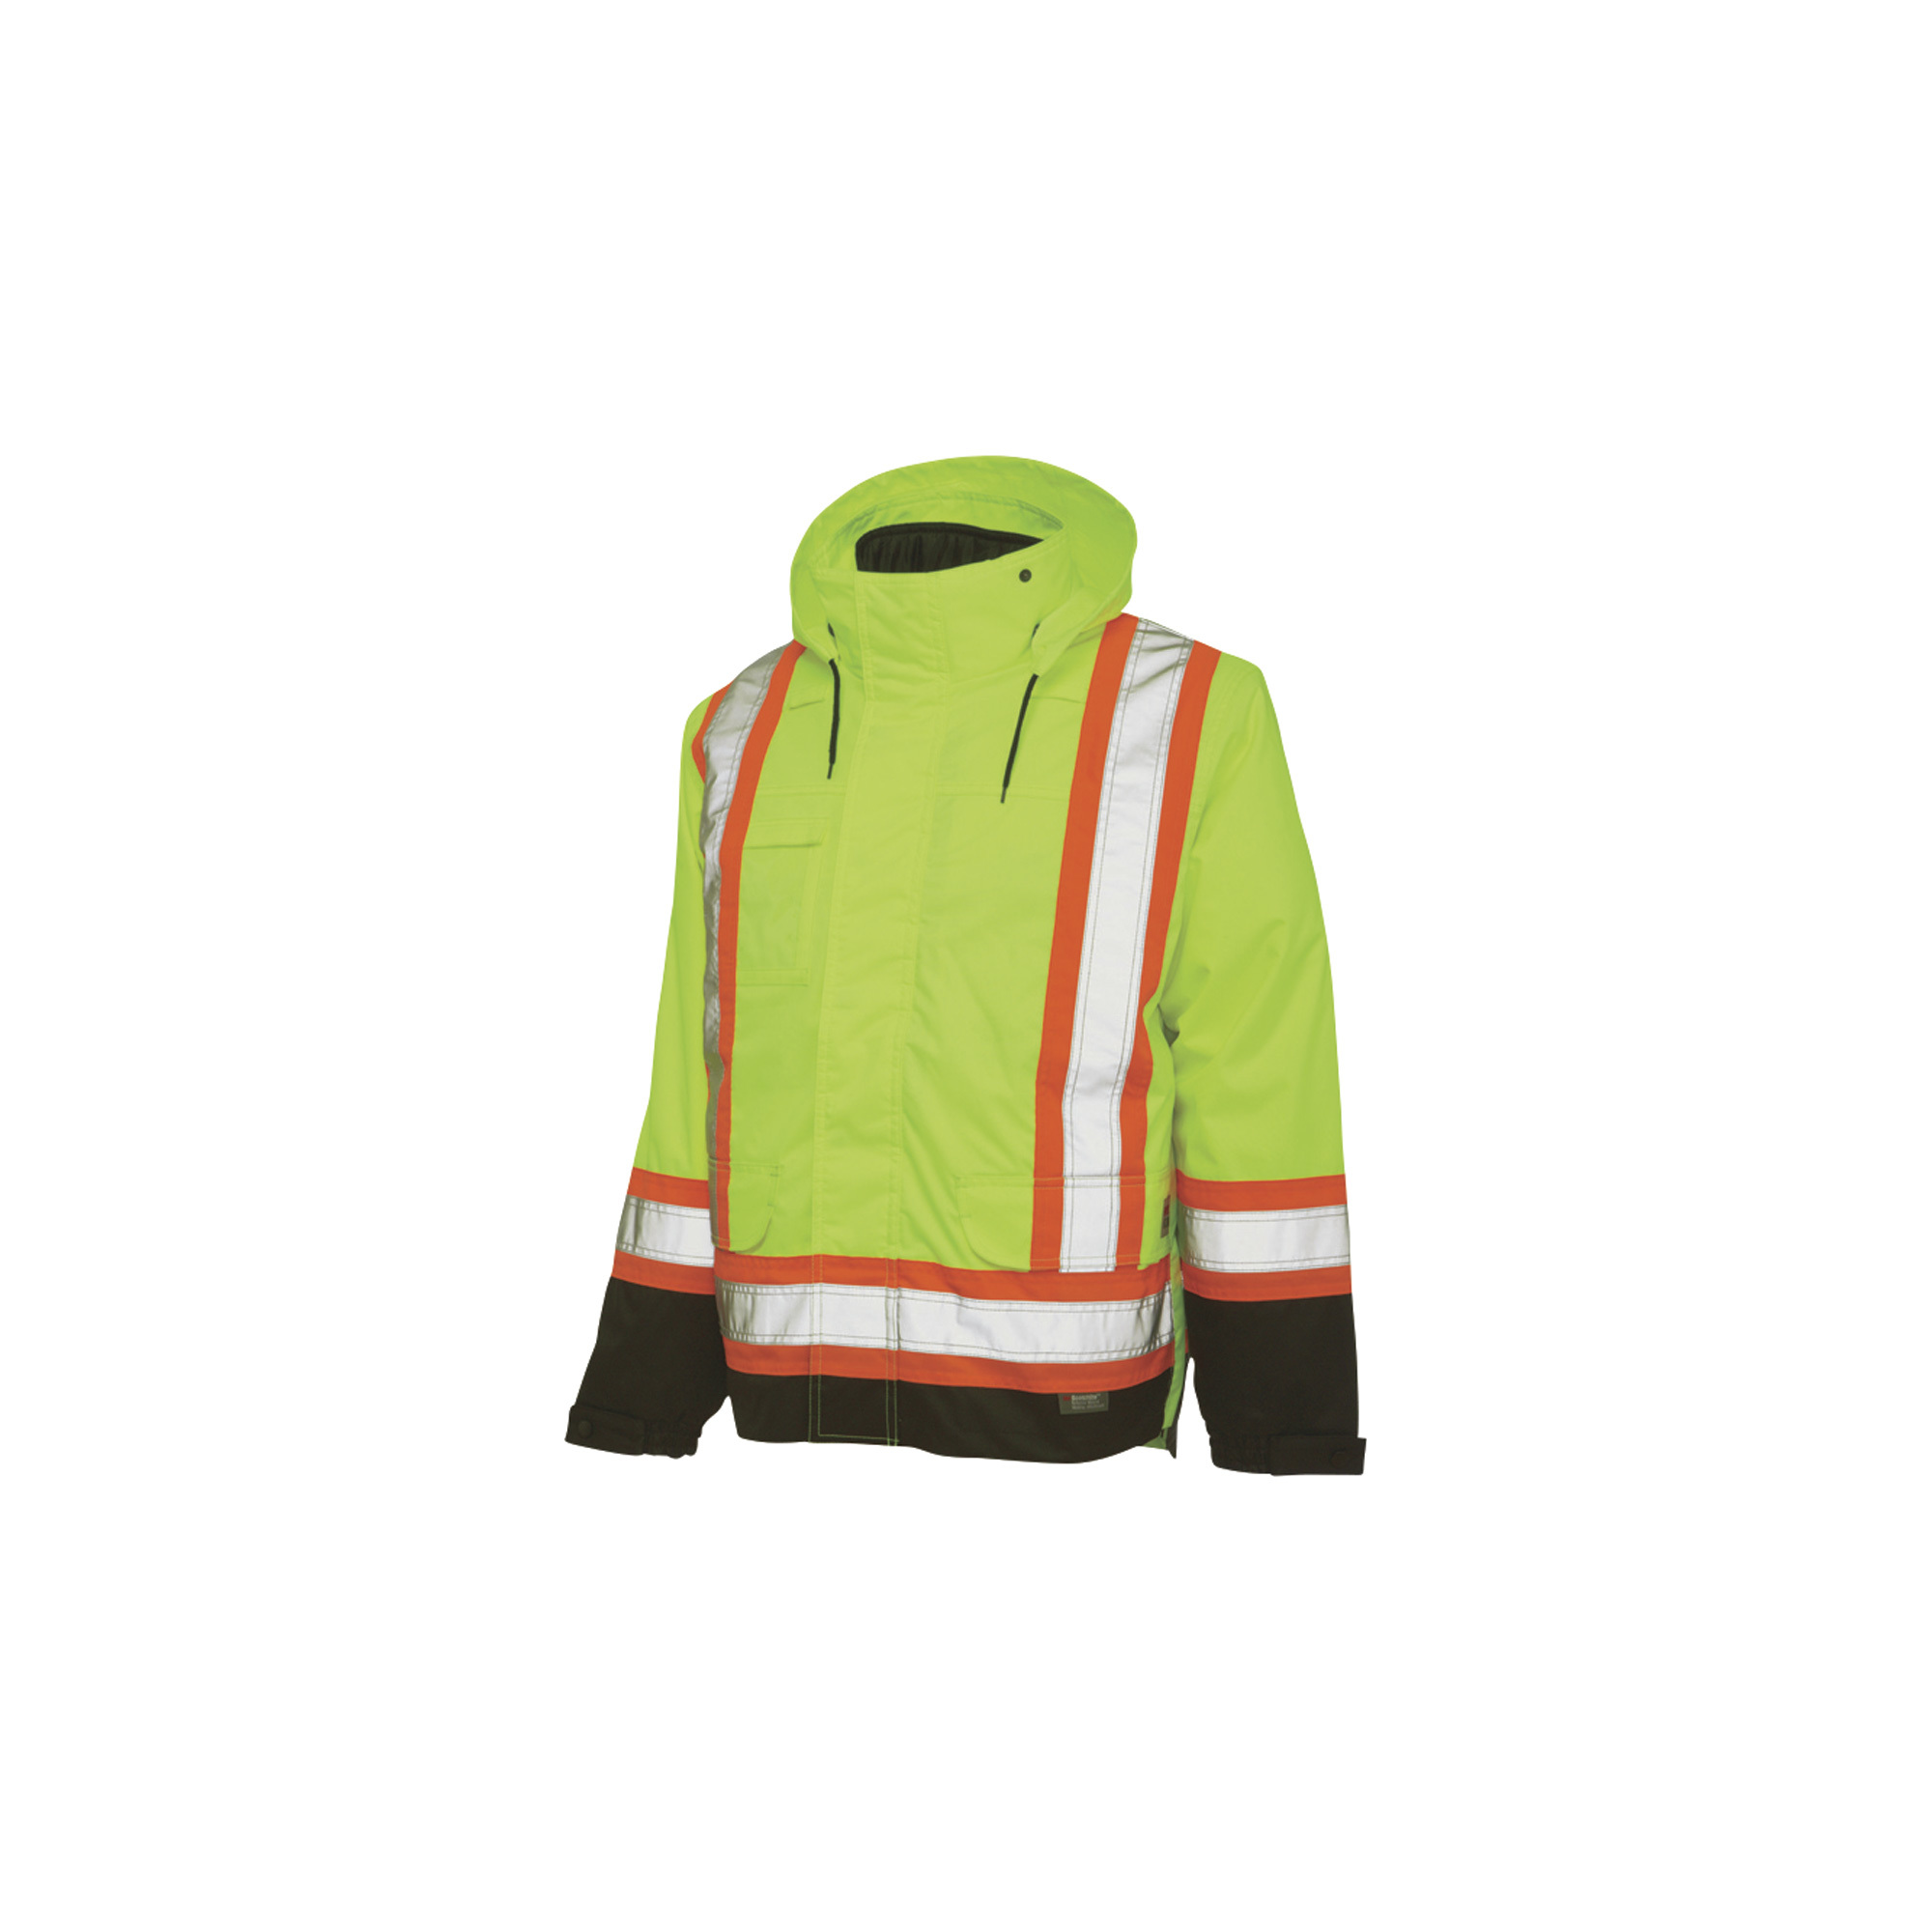 Touch Duck Men's Class 3 High Visibility 5-in-1 Jacket â Lime, Large, Model S42611-FLGR-L